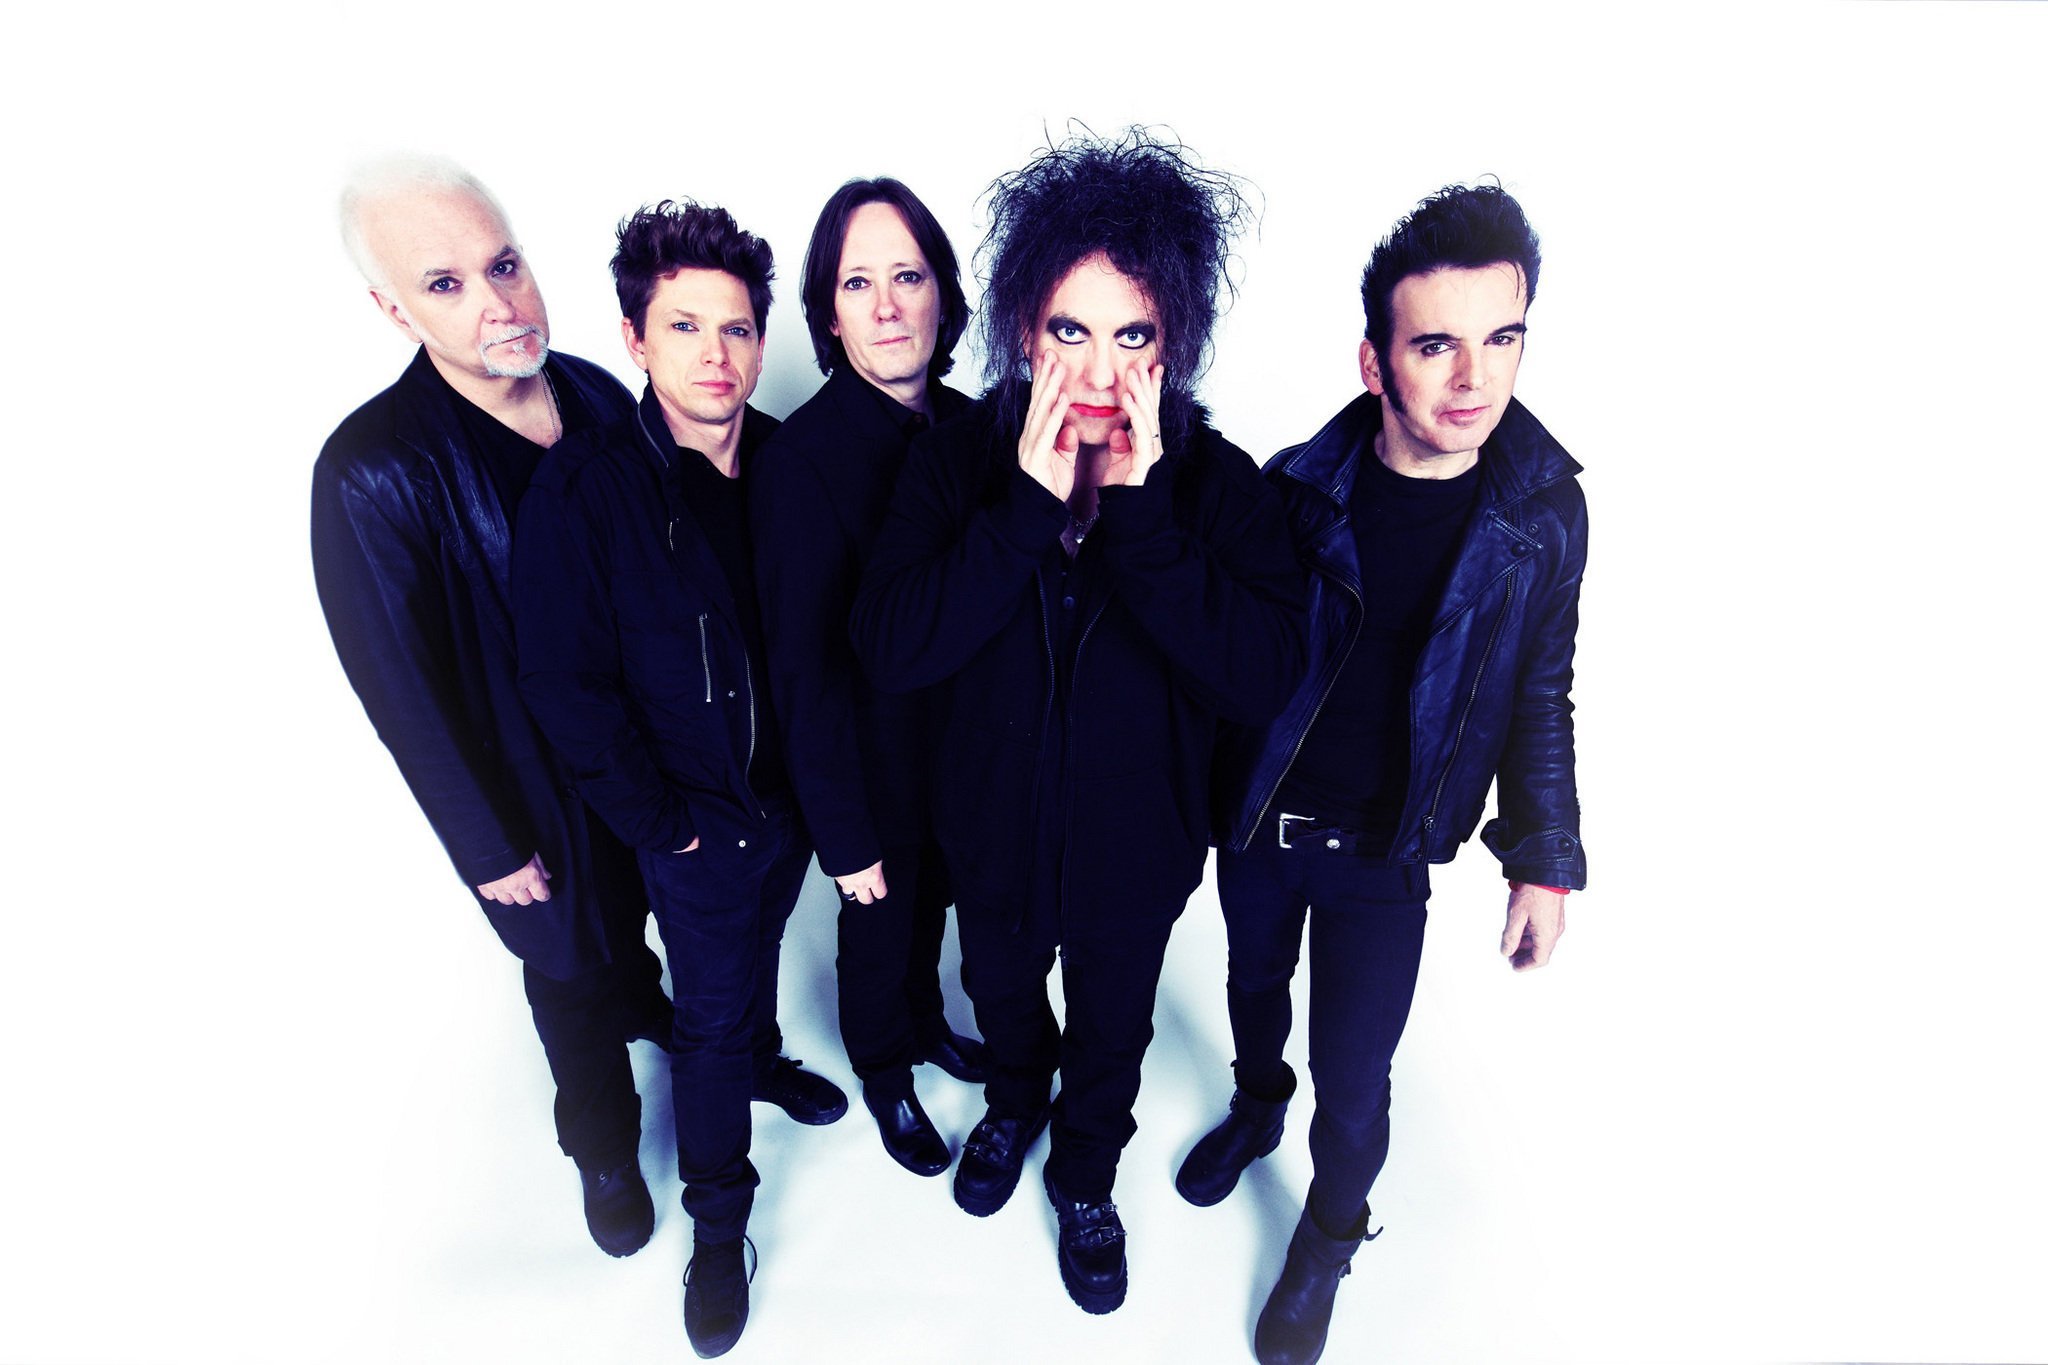 Simon Gallup says he is back in the Cure